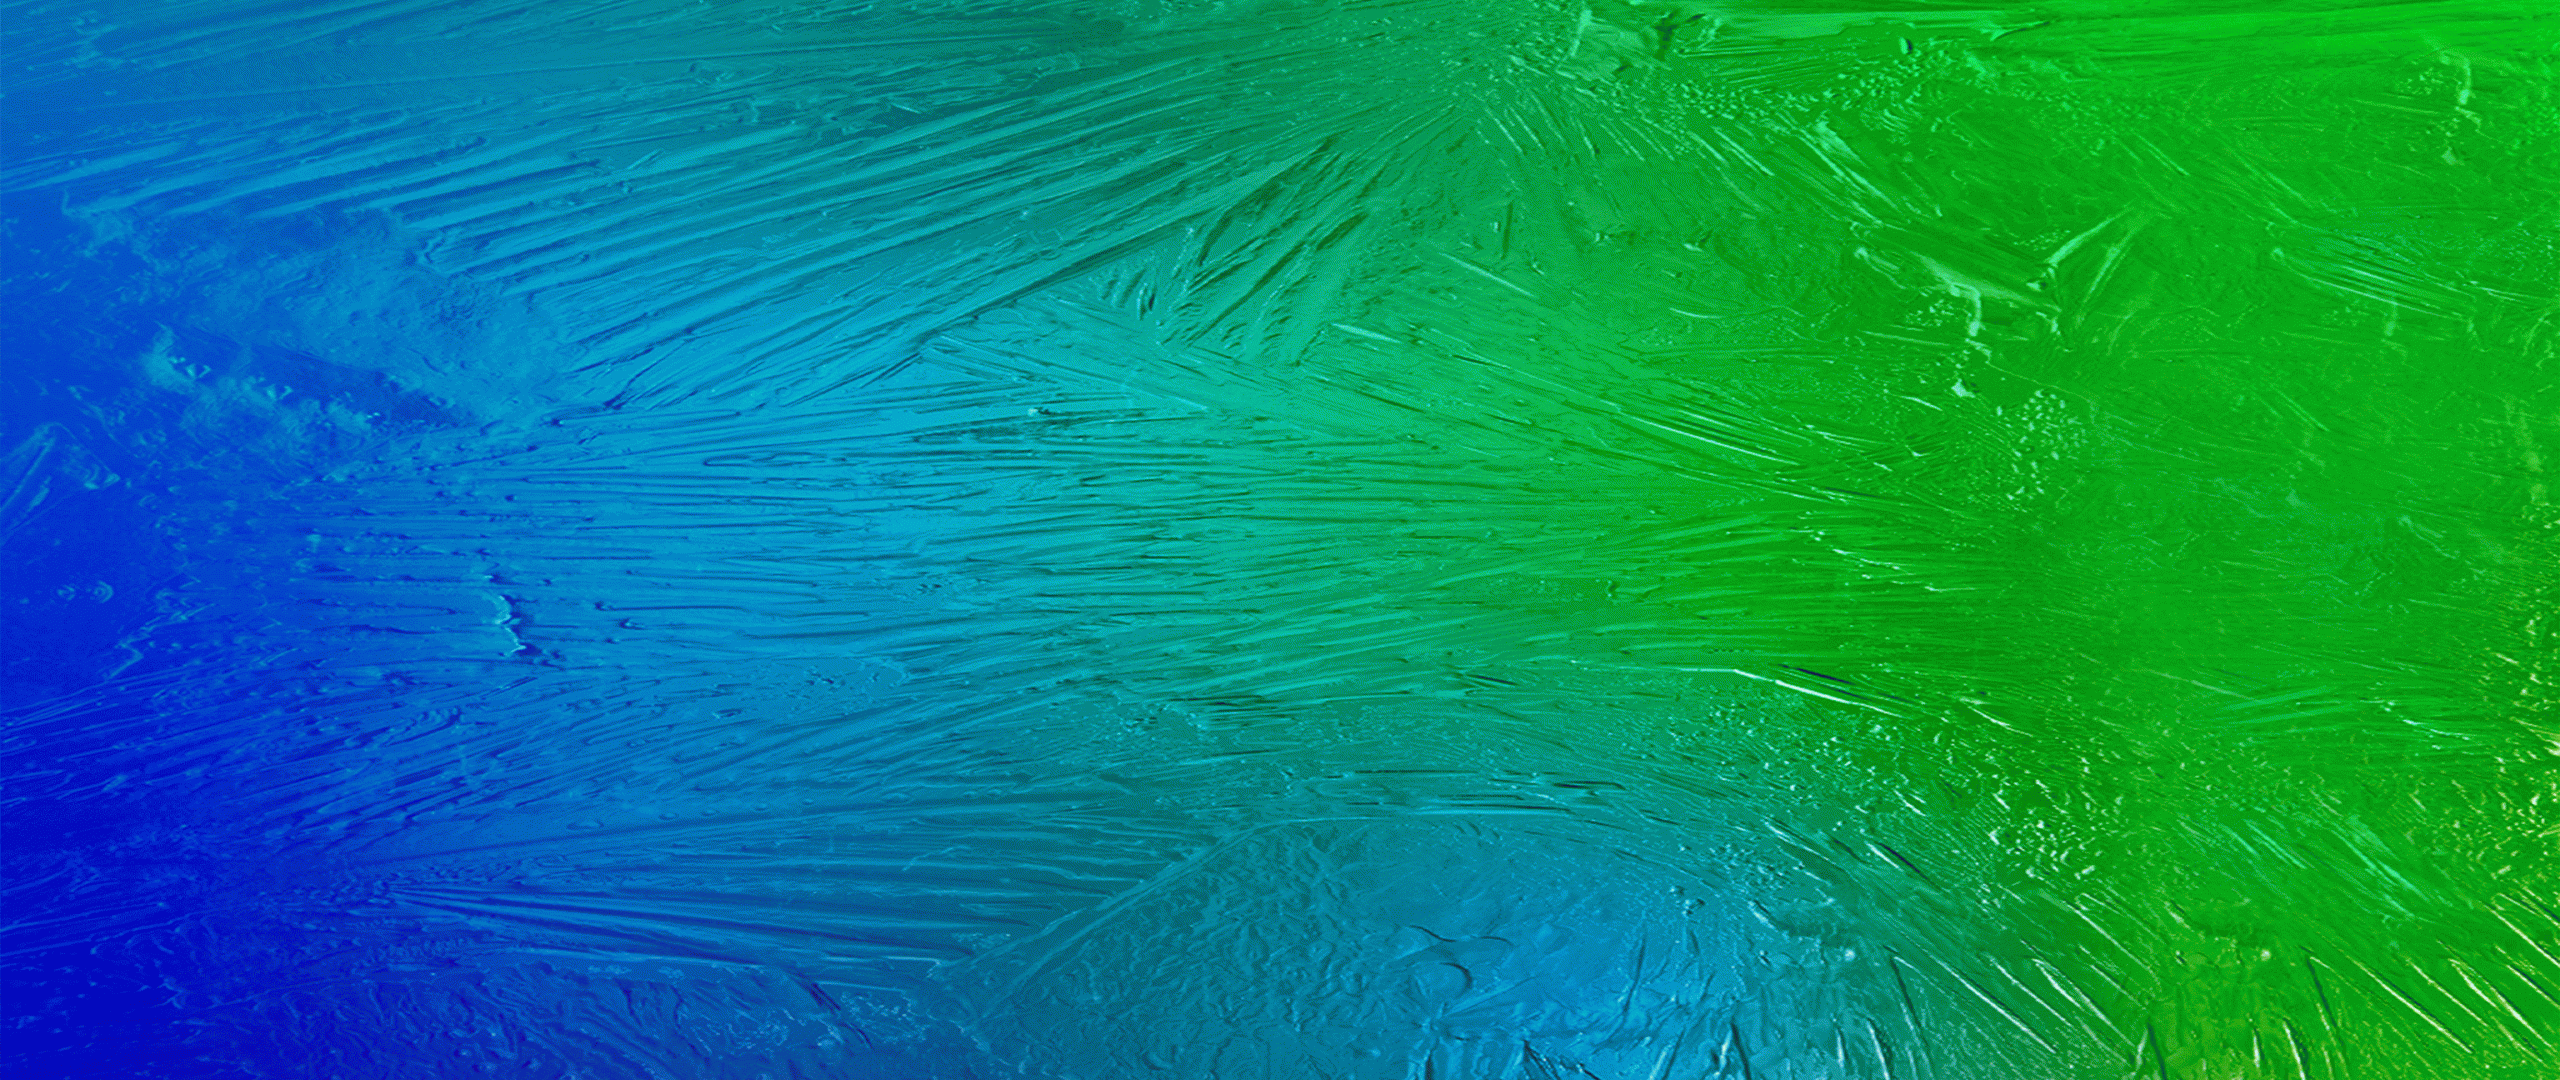 Pattern, Texture, Green And Blue, Gradient, Surface, - Underwater - HD Wallpaper 